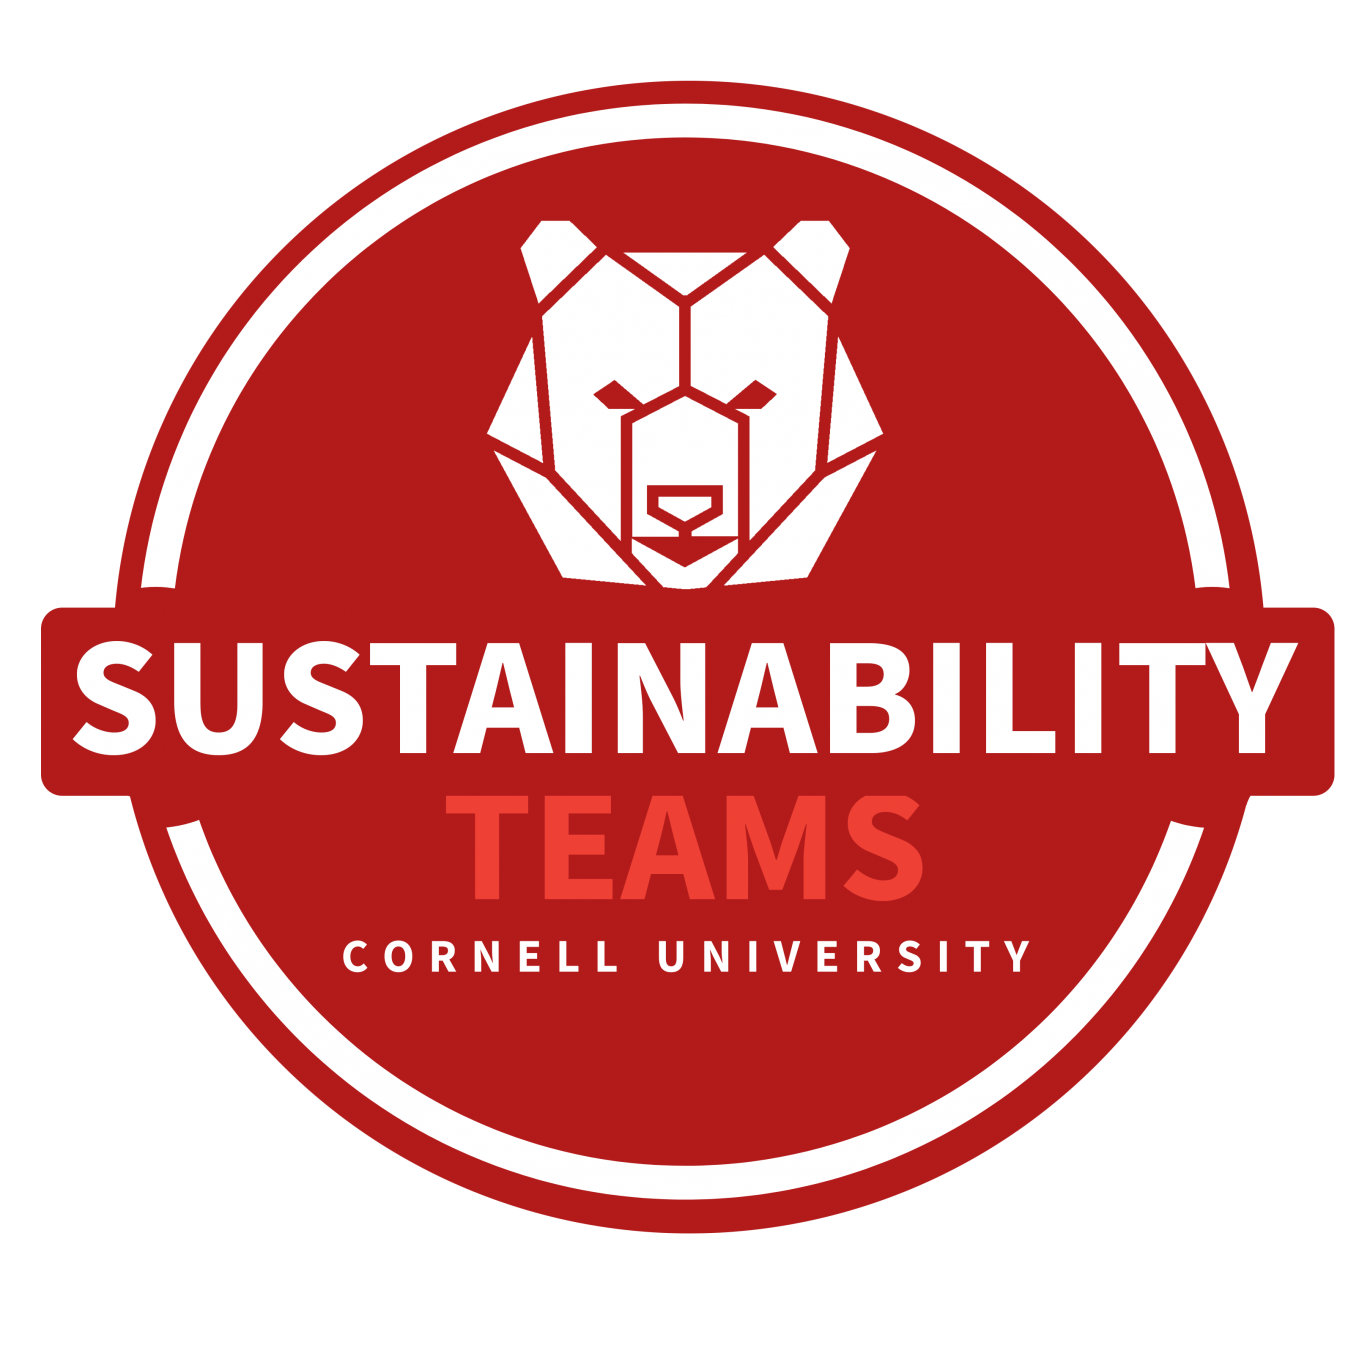 Newco Sustainability Policy | Reducing Energy Usage, Waste, &  Non-recyclable Materials